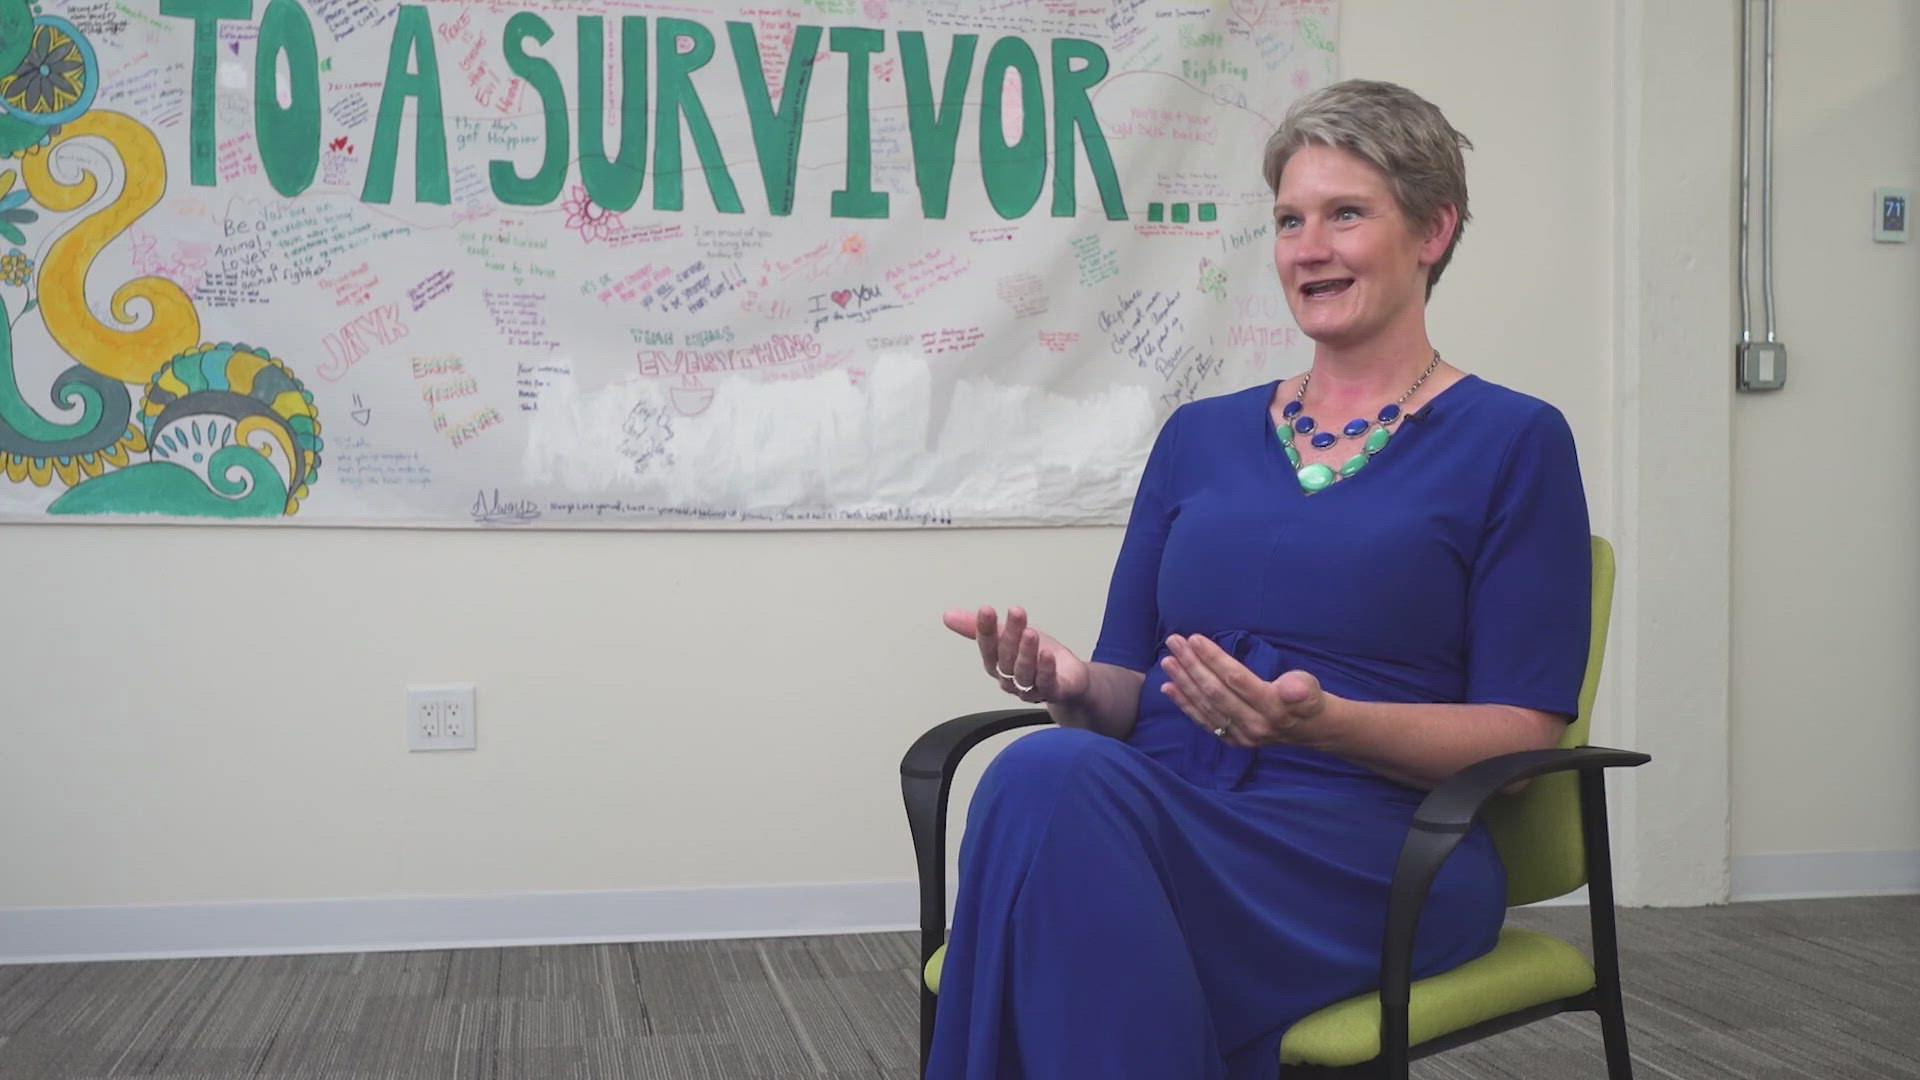 Under Sondra Miller's leadership, the CRCC grew its service area to four counties, and now provides direct services to more than 10,000 survivors annually.